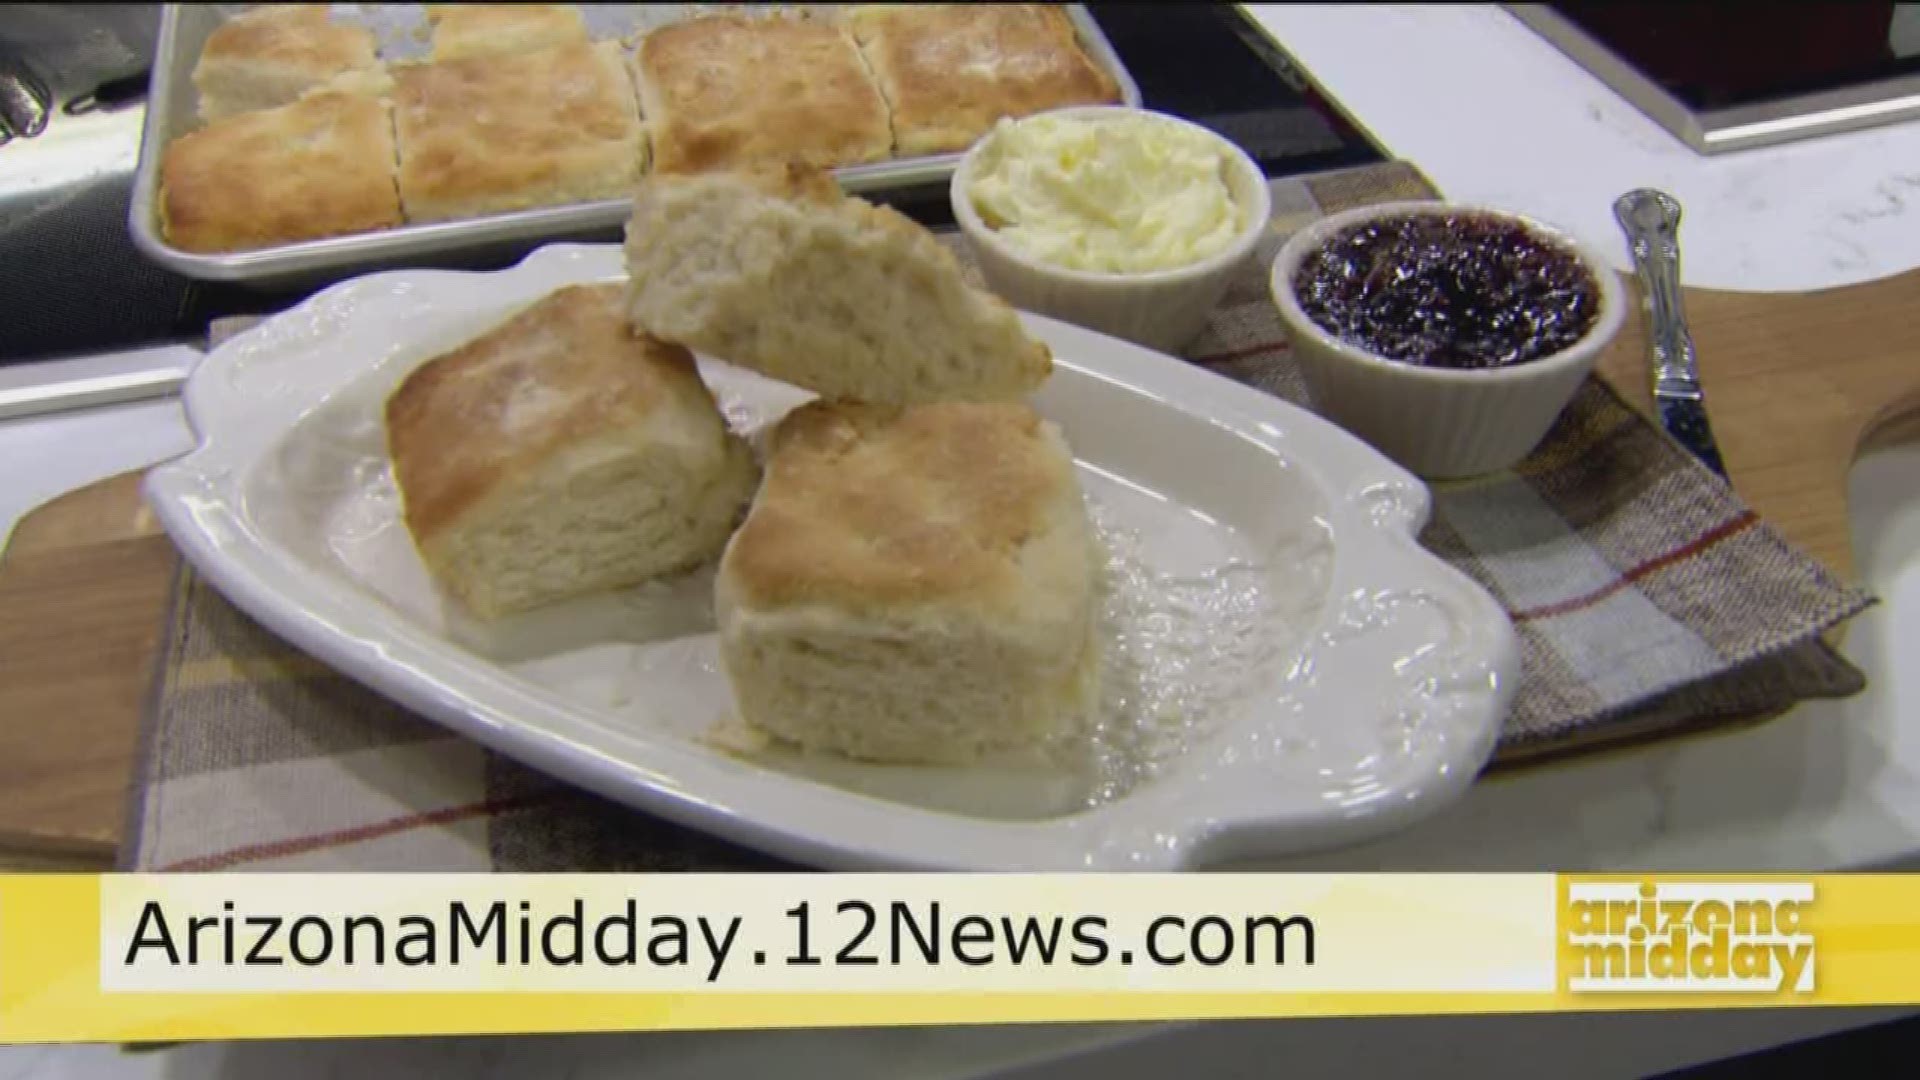 Jan shows us how to create biscuits with just 3 ingredients.